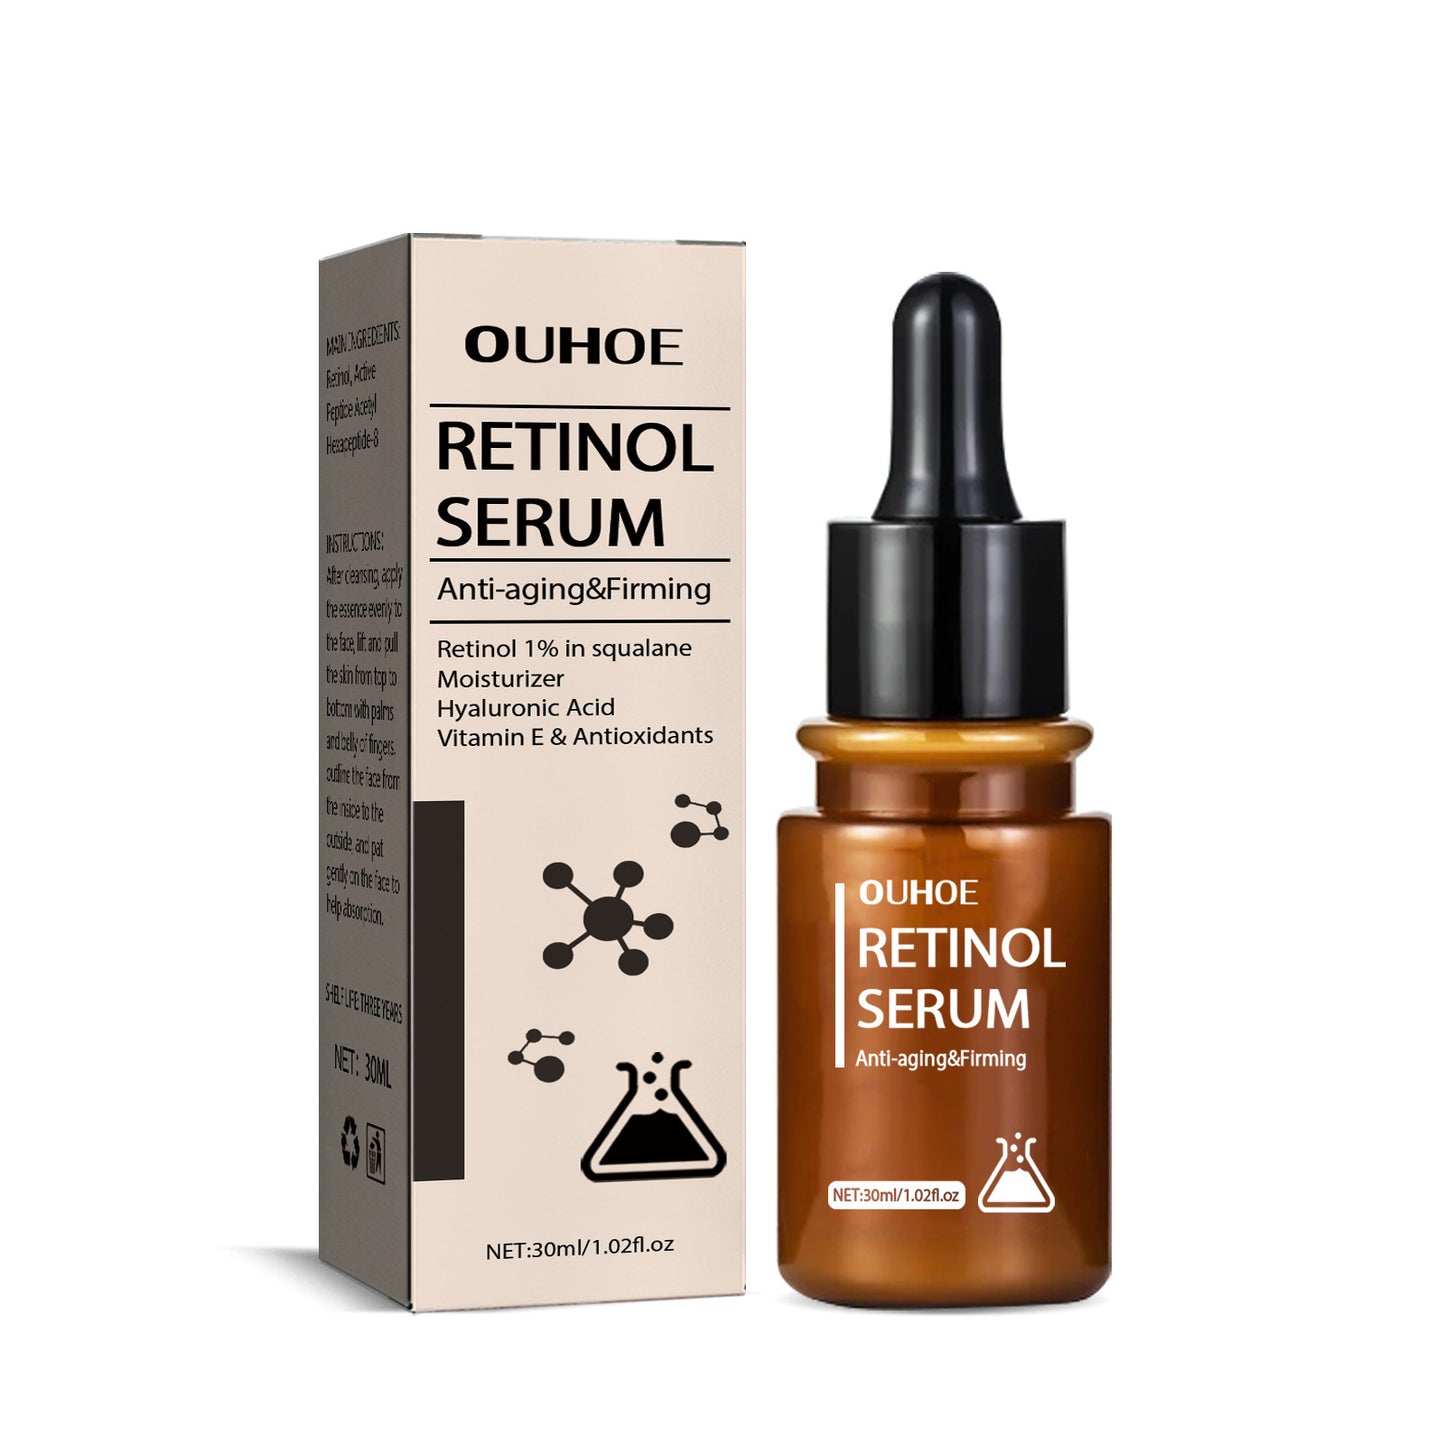 OUHOE Retinol Skin Beautifying Essence Attenuate Dry Lines, Fine Lines, Prevent Dullness, Moisturize, Tender Skin And Resist Wrinkles Essence(30ml)